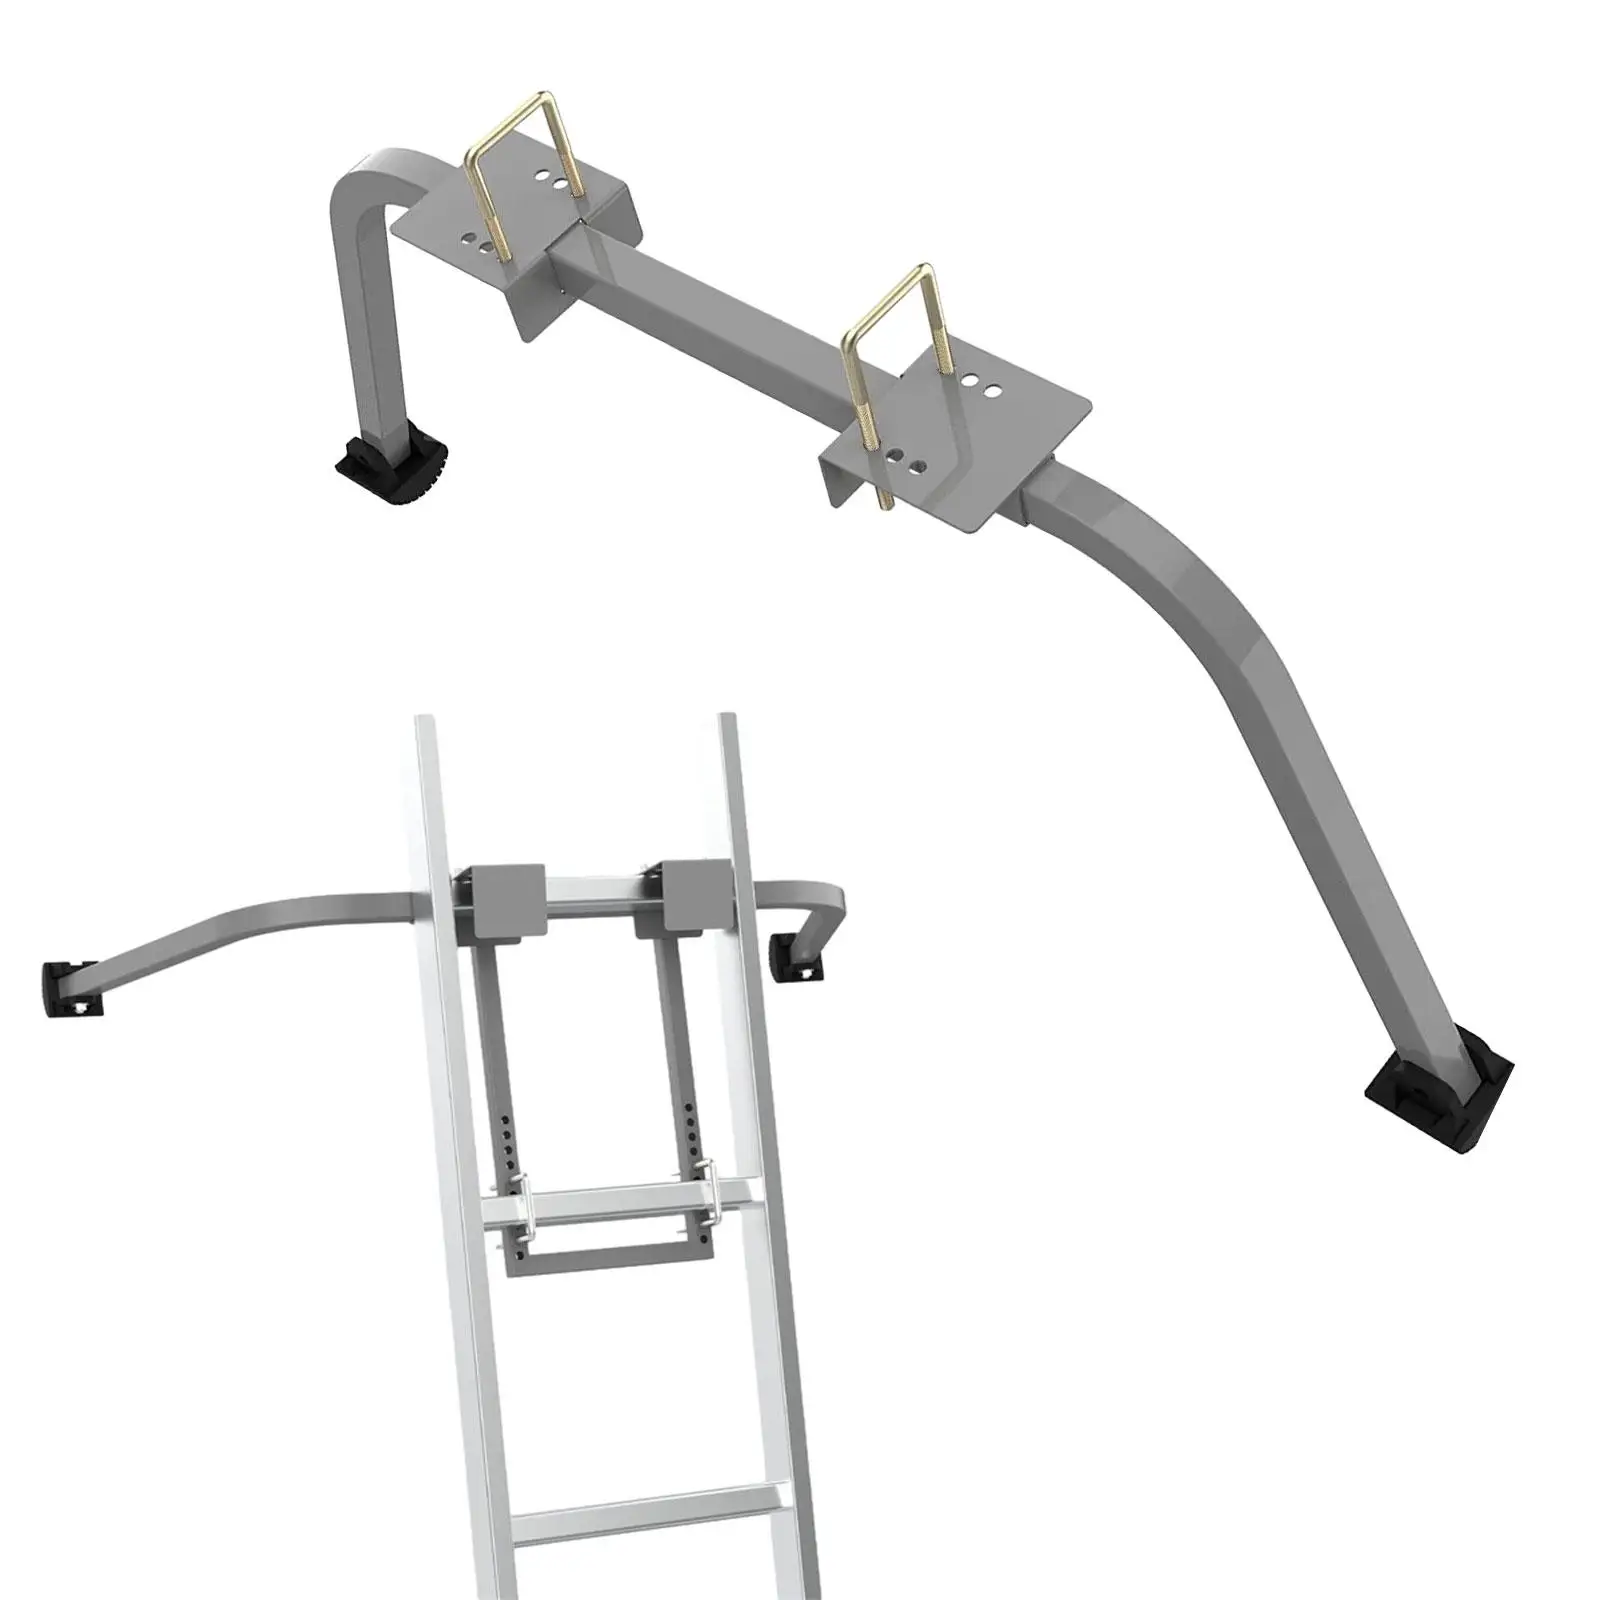 Ladder Stabilizer Portable Adjustable Mounting Holes Metal Wall Ladder Standoff for Roof Ladders Gutter Repair Outdoor Home Wall